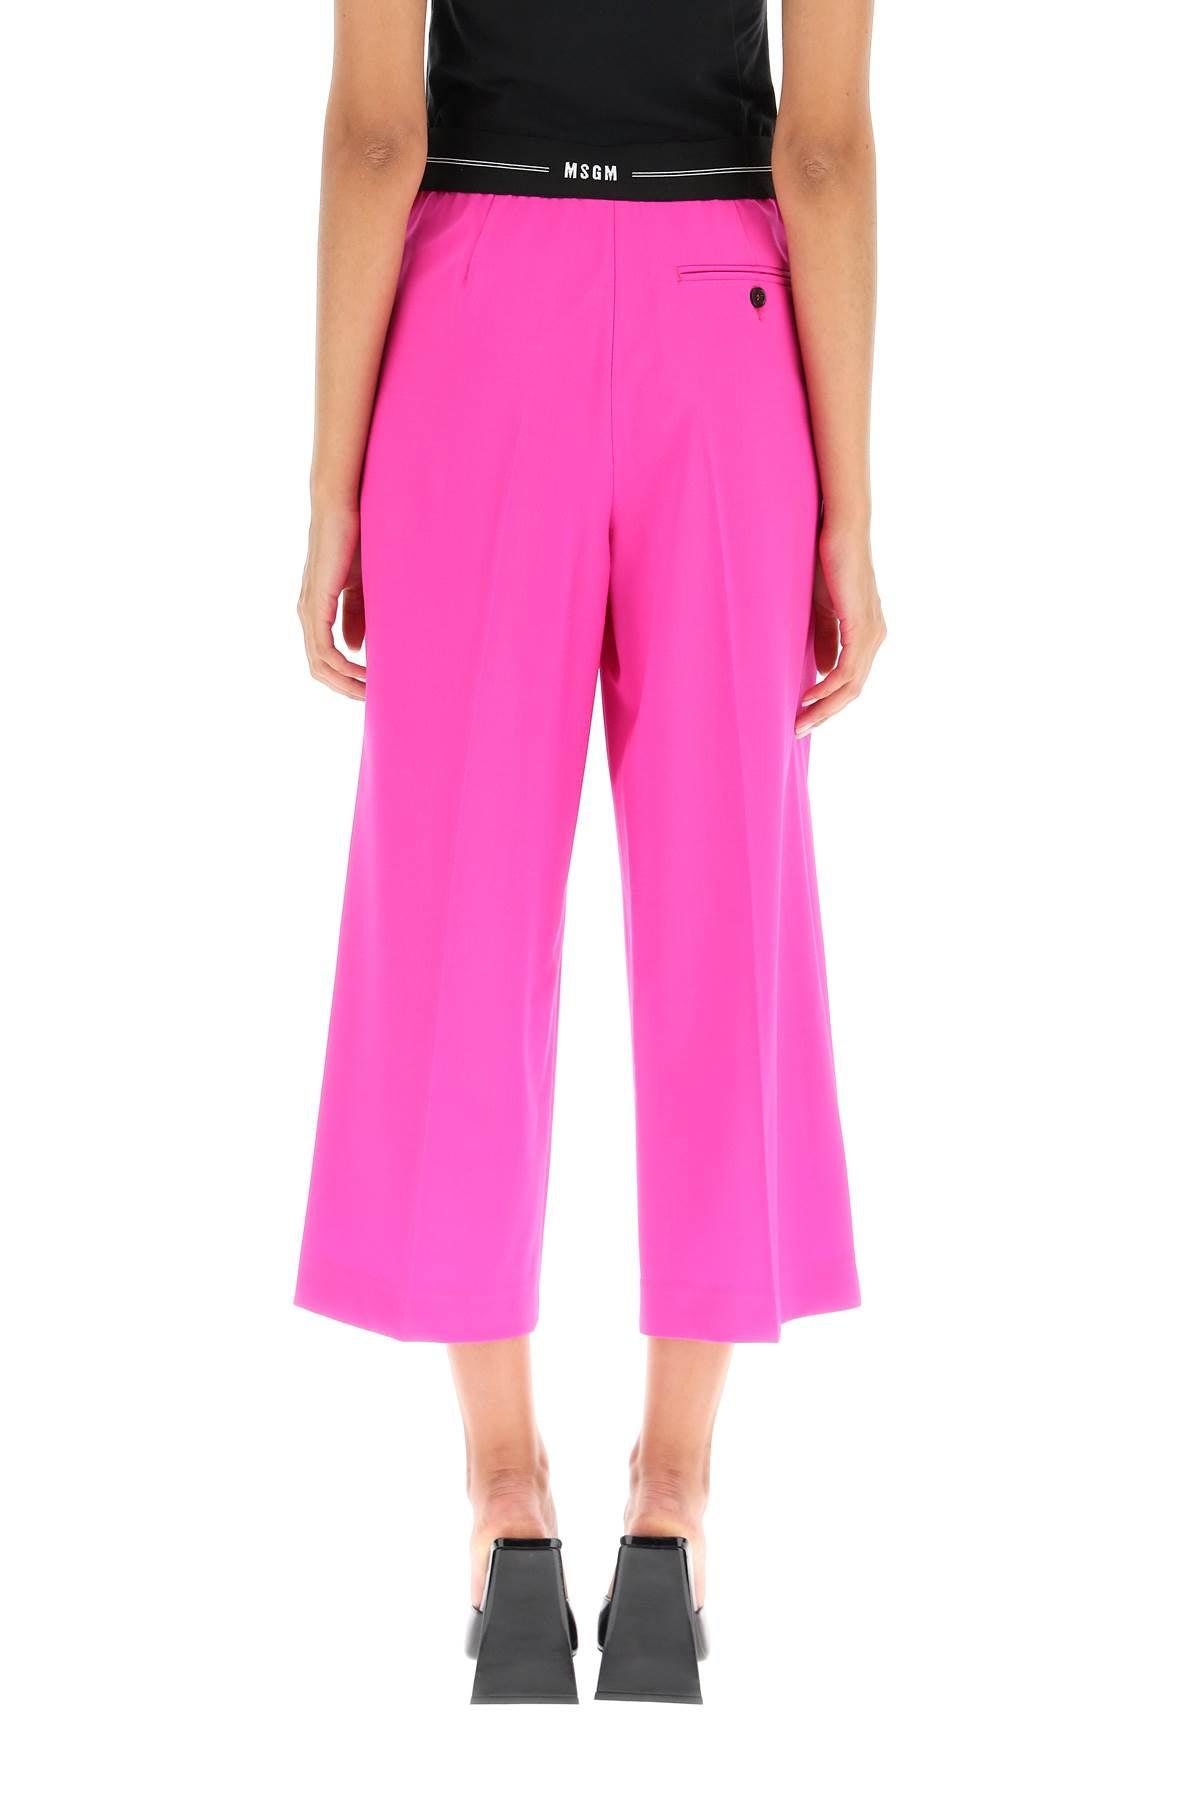 MSGM Cropped Trousers With Elastic Band in Pink | Lyst UK